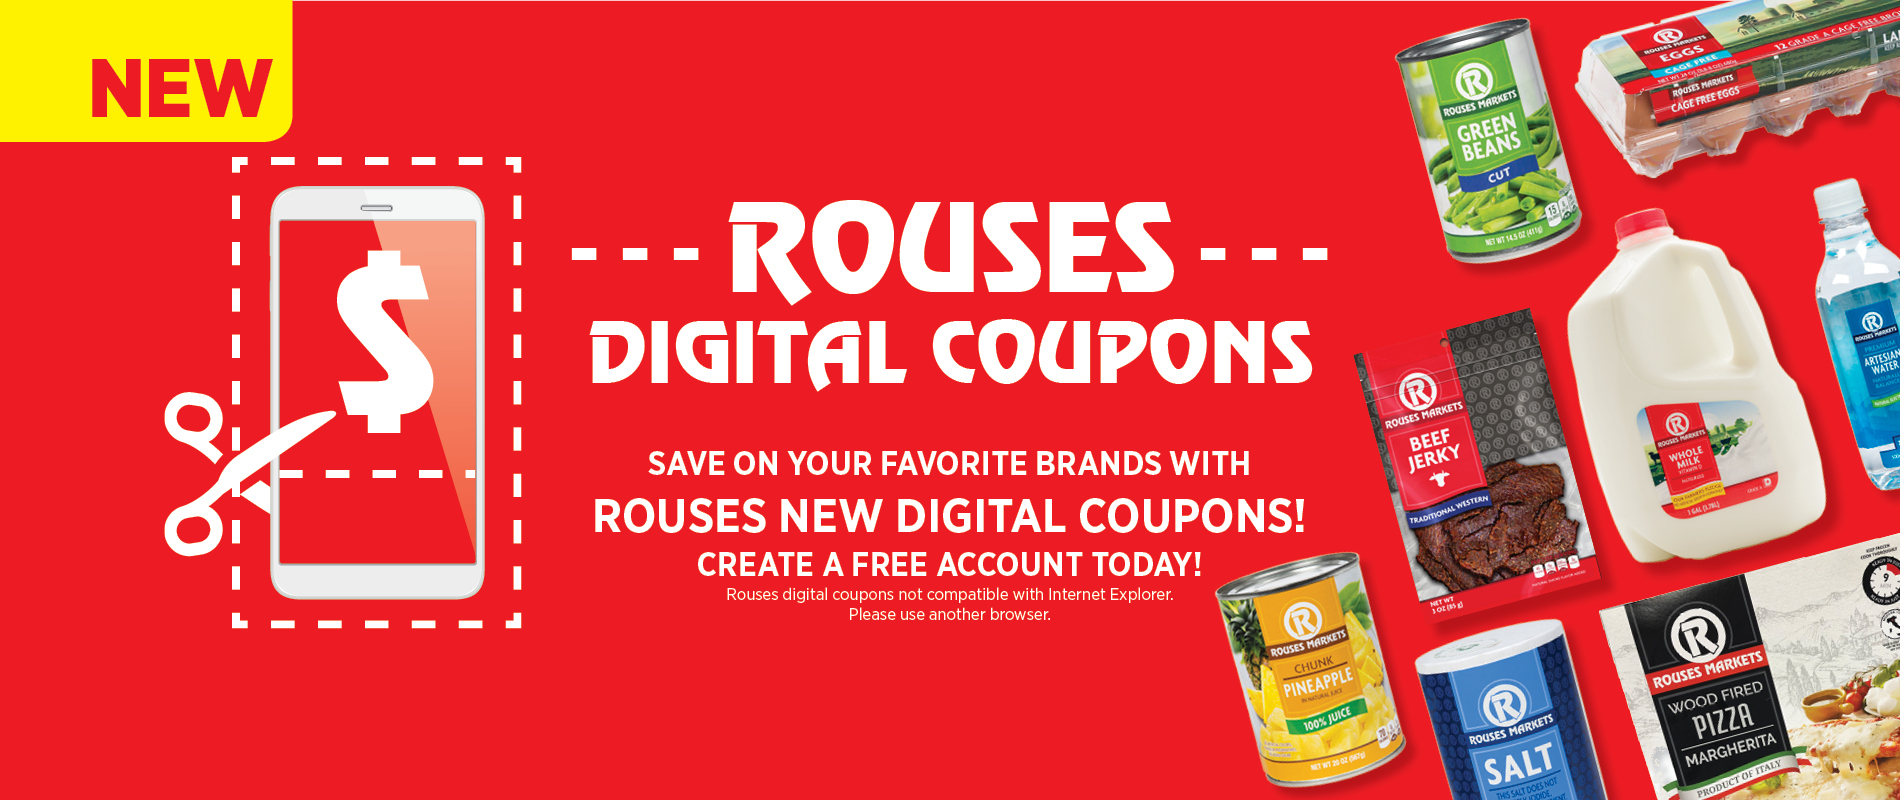 Rouses Digital Coupons Rouses Supermarkets